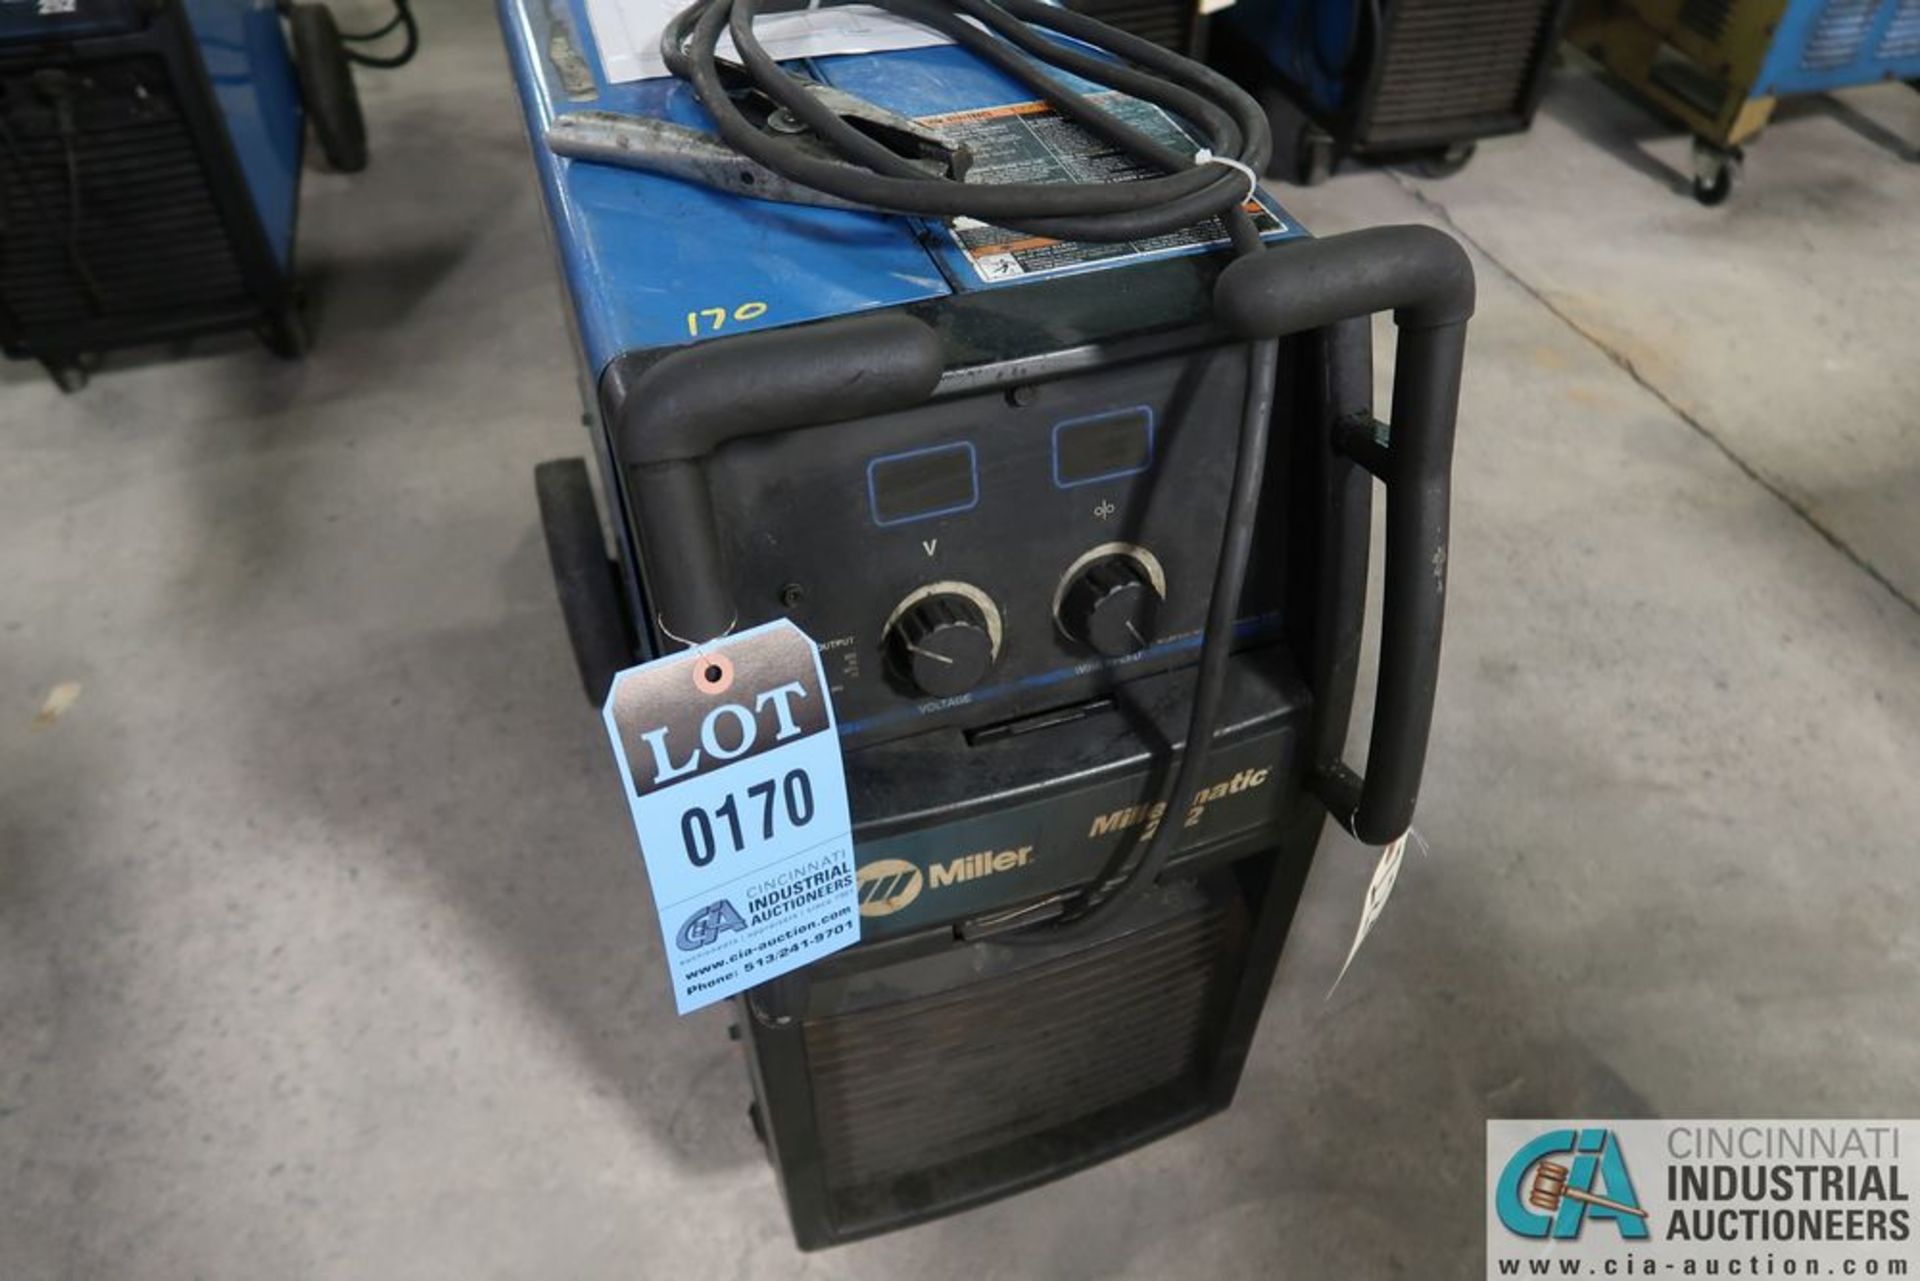 250 AMP MILLER MODEL MILLERMATIC 252 MIG WELDING POWER SOURCE; S/N MD281328N, WITH BUILT-IN WIRE